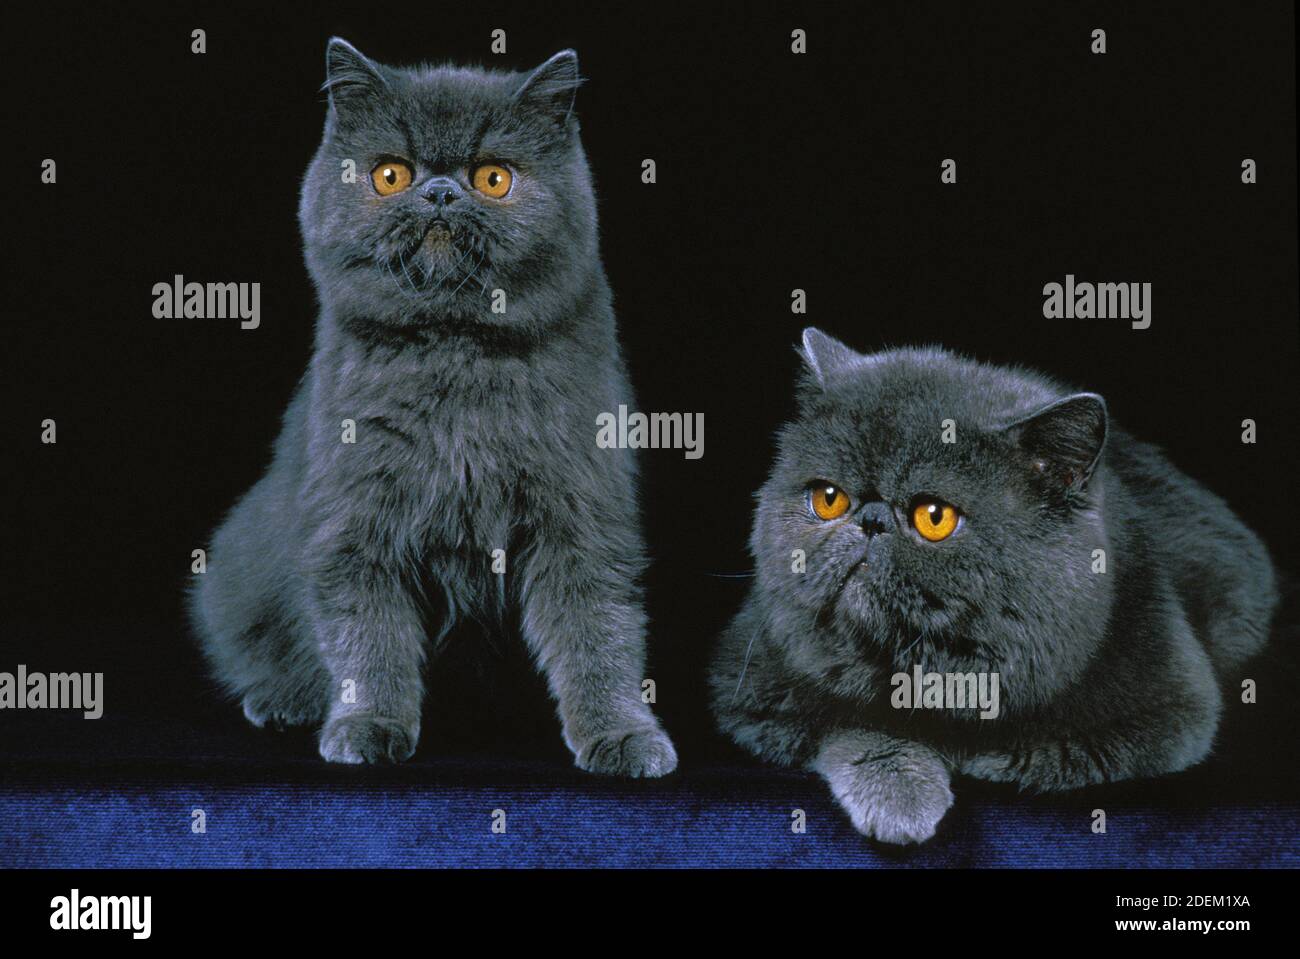 Exotic Shorthair Domestic Cat, Adults against Black Background Stock Photo  - Alamy